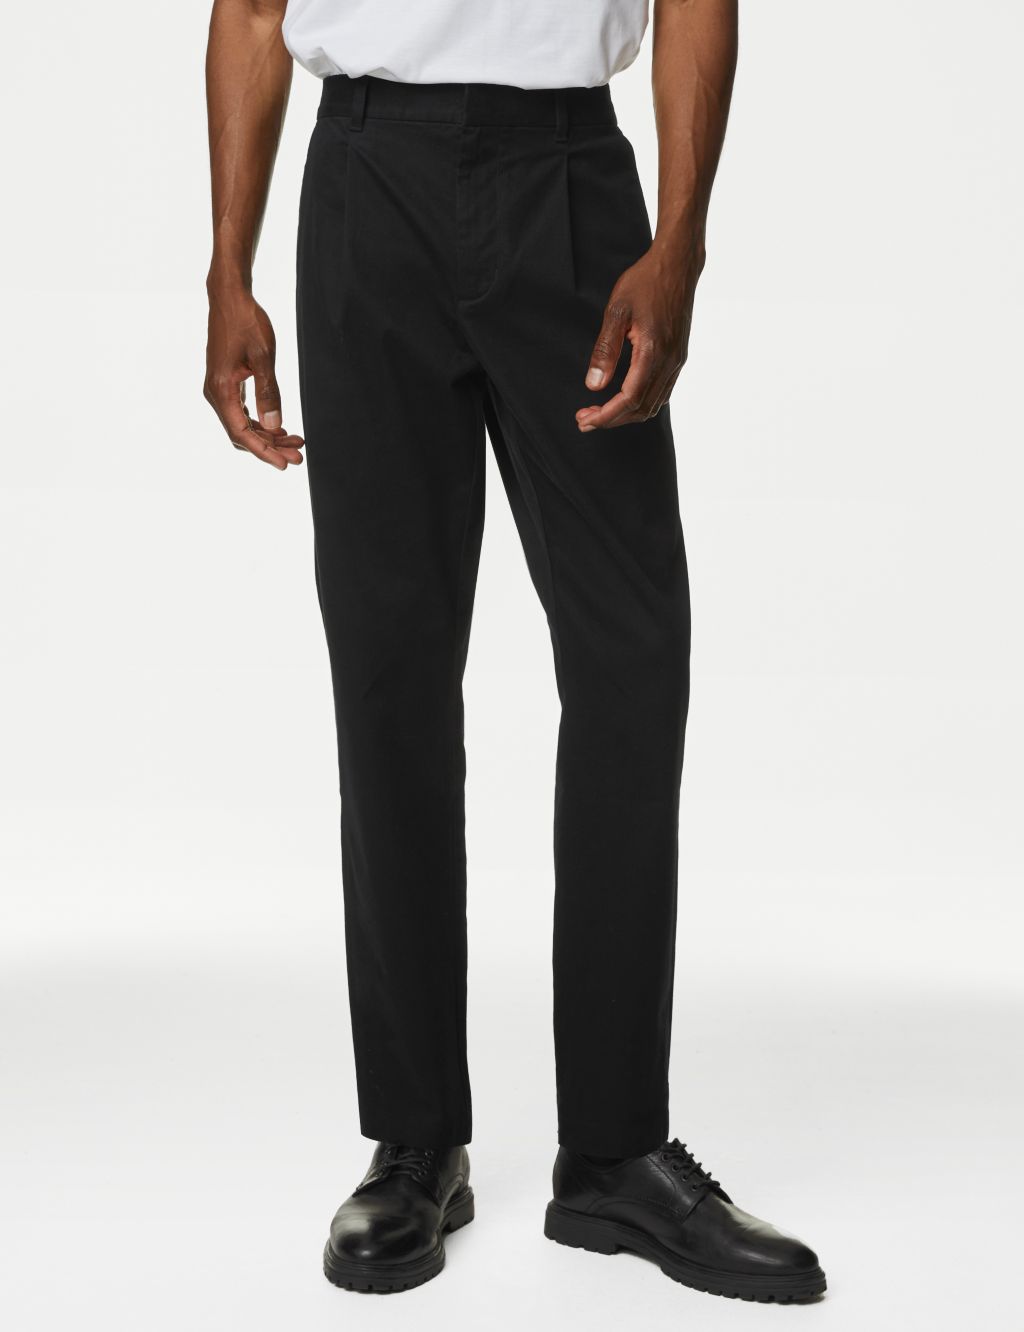 Tapered Fit Half-Elasticated Waist Chinos image 4